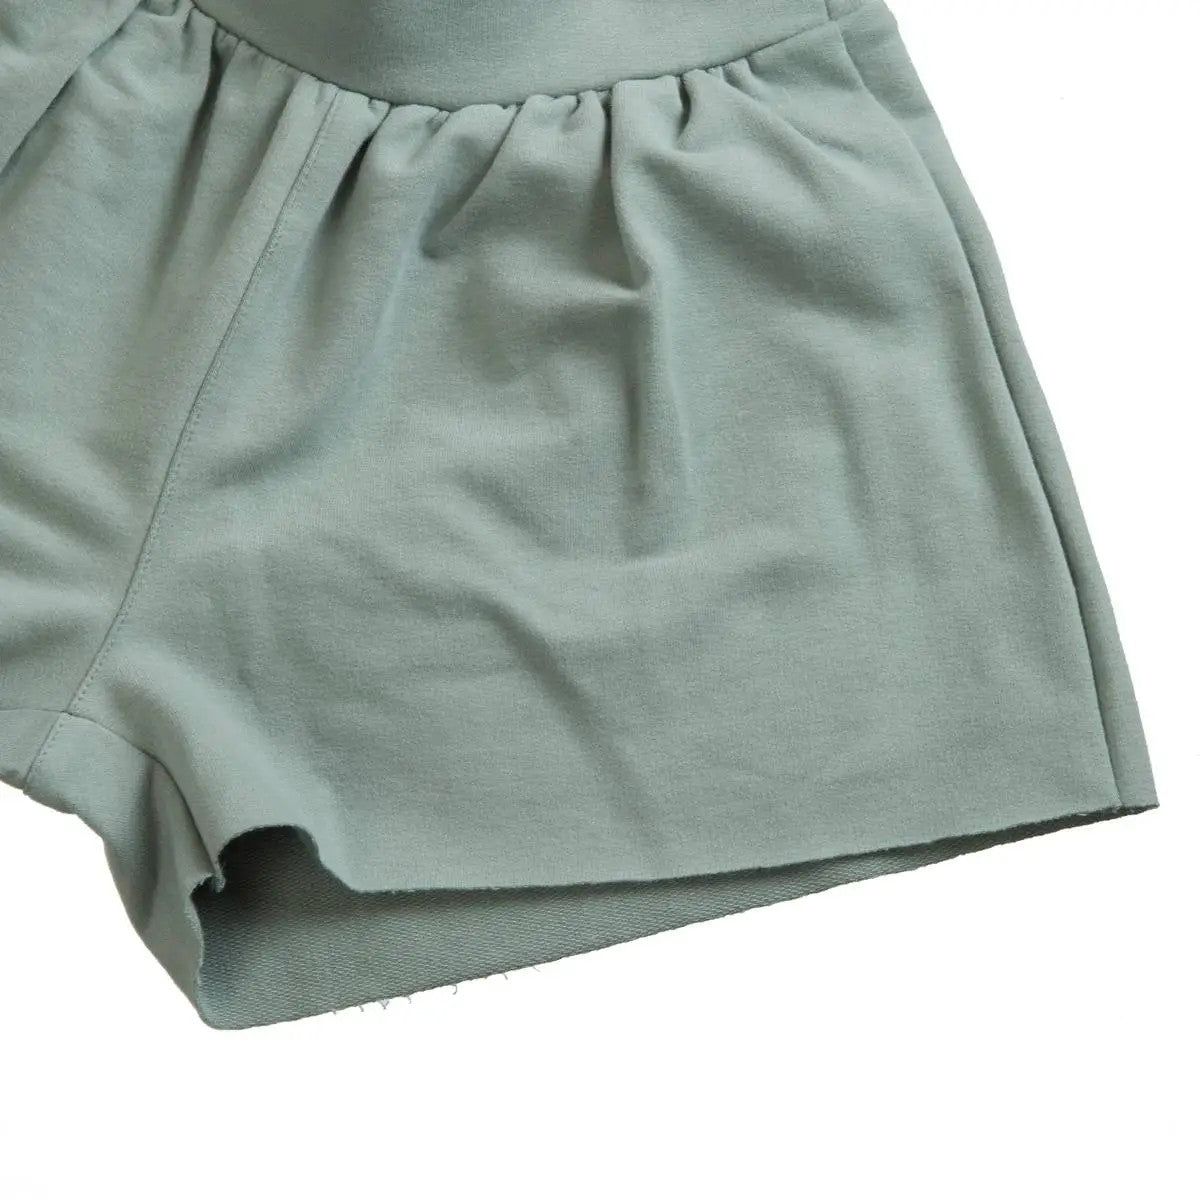 Little Hedonist organic pleated shorts with flowing cut and hidden pockets in Chinois Green. Sustainable fashion for kids.